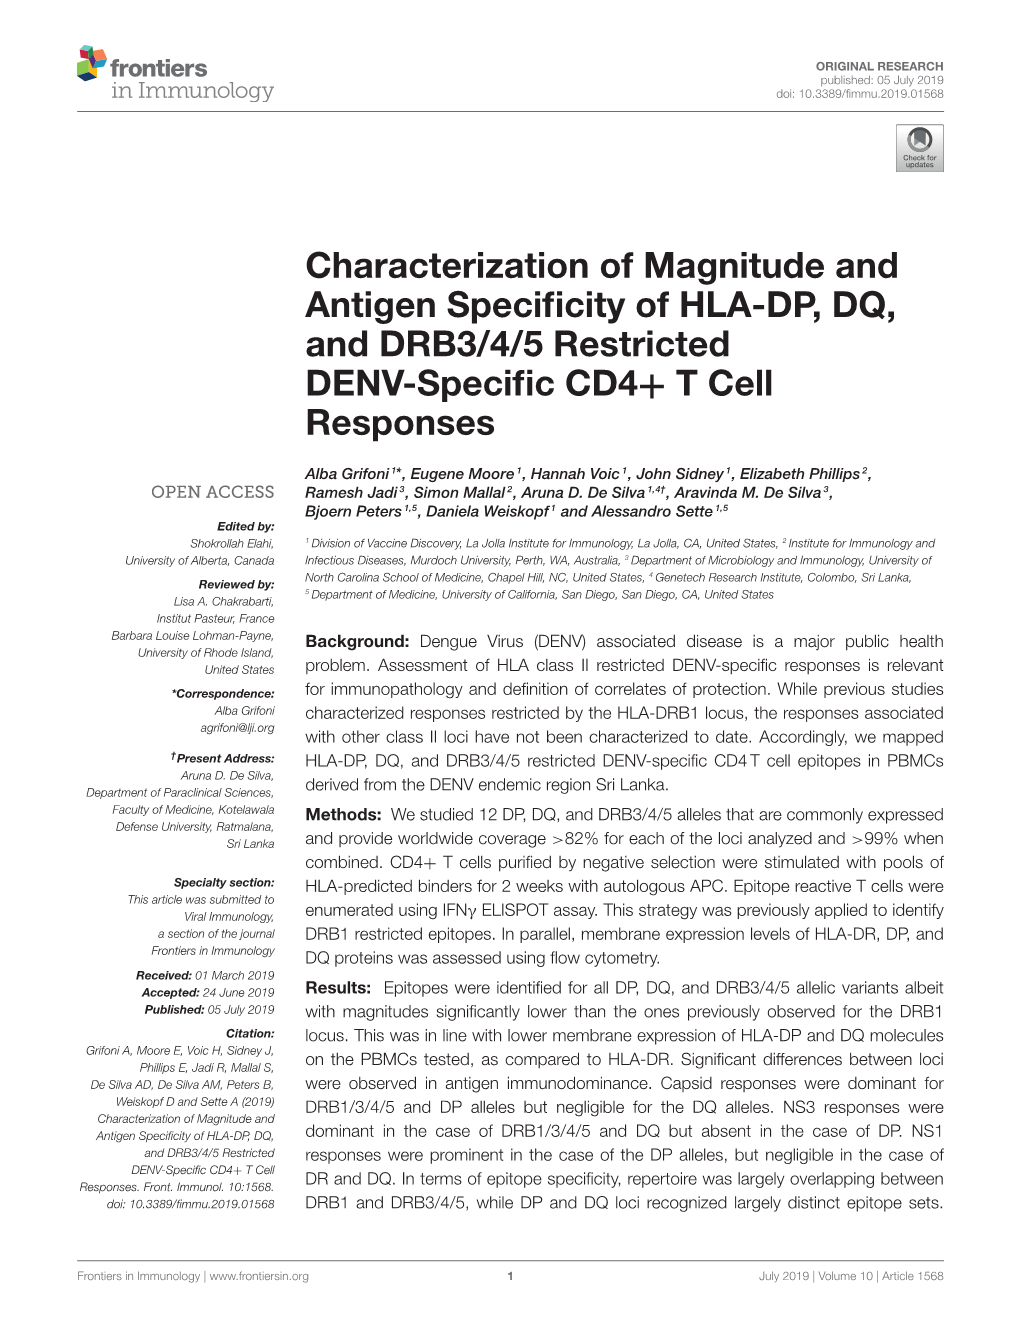 Characterization of Magnitude and Antigen Specificity of HLA-DP, DQ, and DRB3/4/5 Restricted DENV-Specific CD4+ T Cell Responses